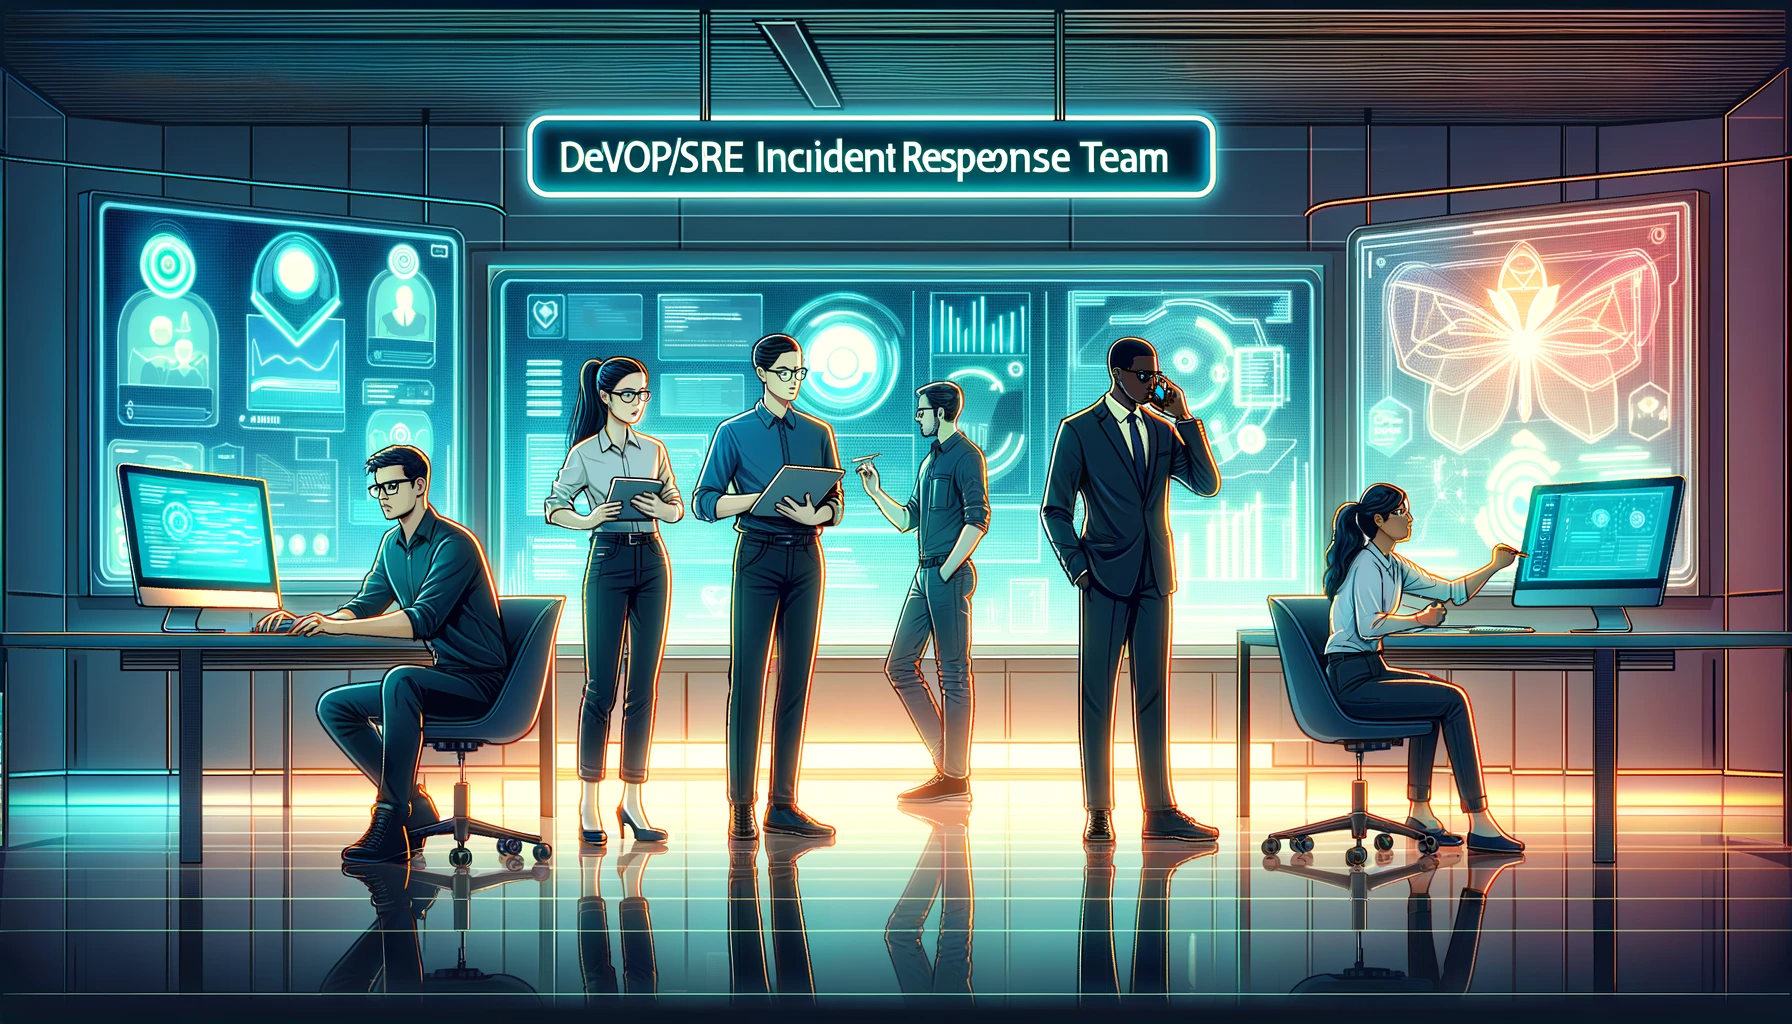 What Is an Incident Response Team?